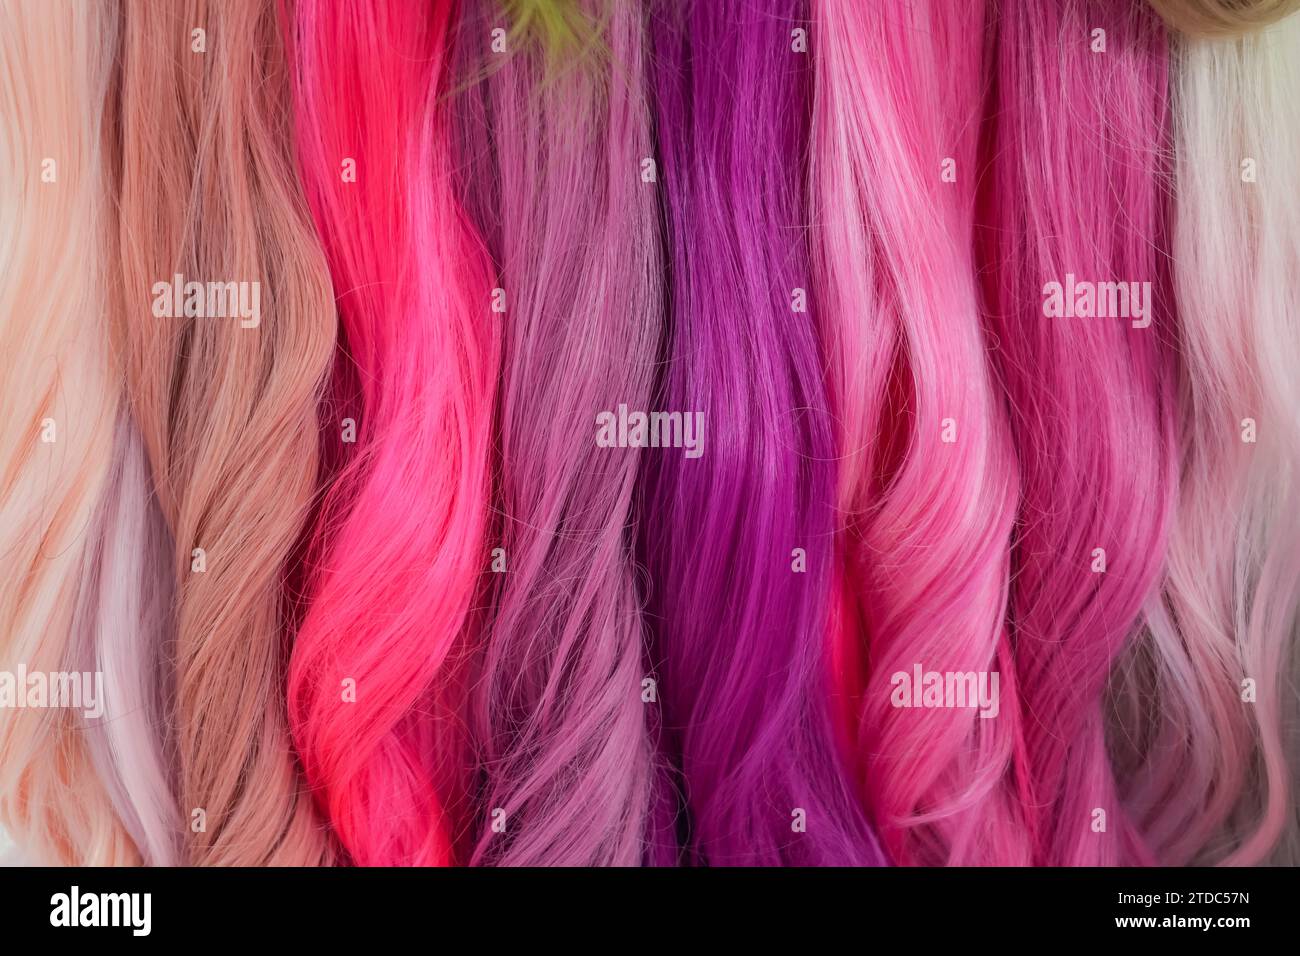 Hair samples of different colors palette. Different hair bright rich tint colors - pink, crimson, orange. Various hair colors set background close up Stock Photo